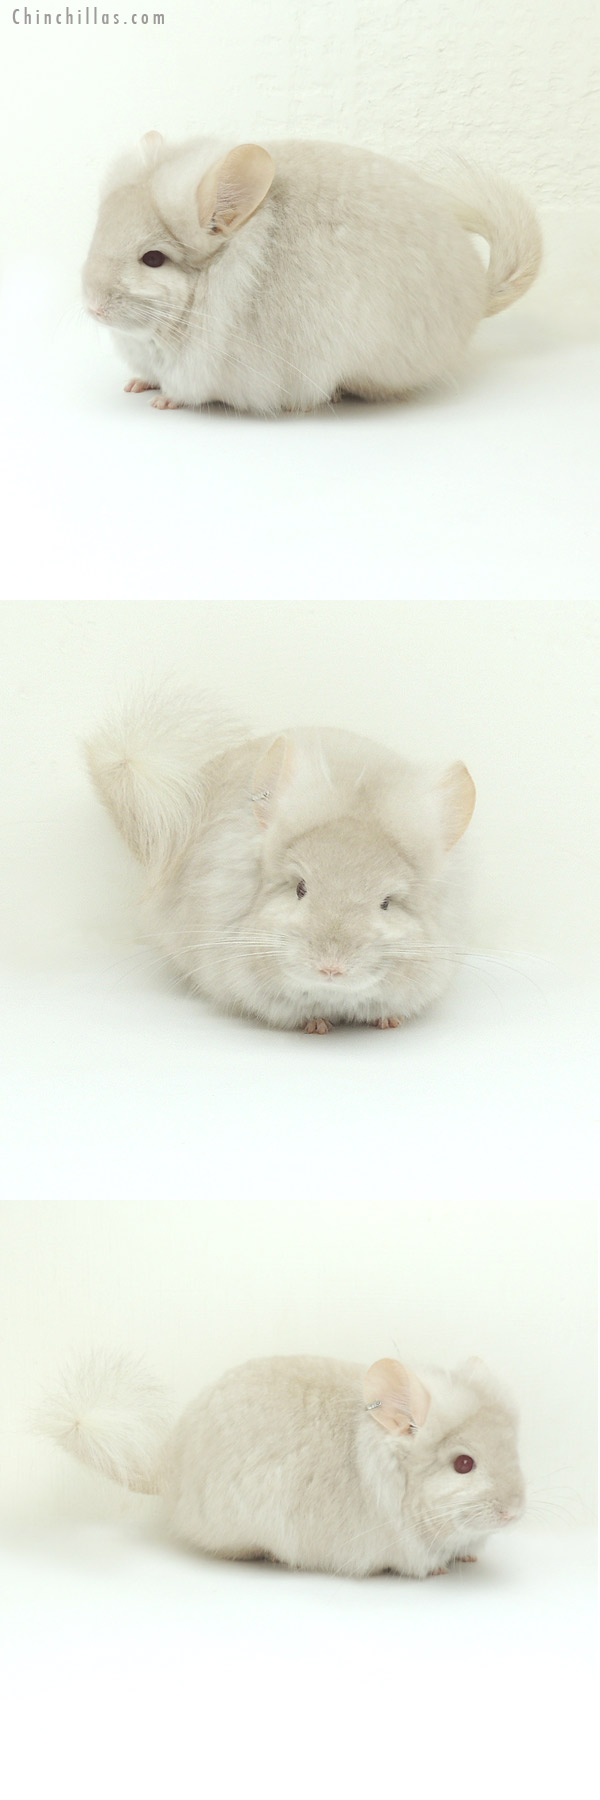 Chinchilla or related item offered for sale or export on Chinchillas.com - 13018 Homo Beige Royal Persian Angora Male Chinchilla